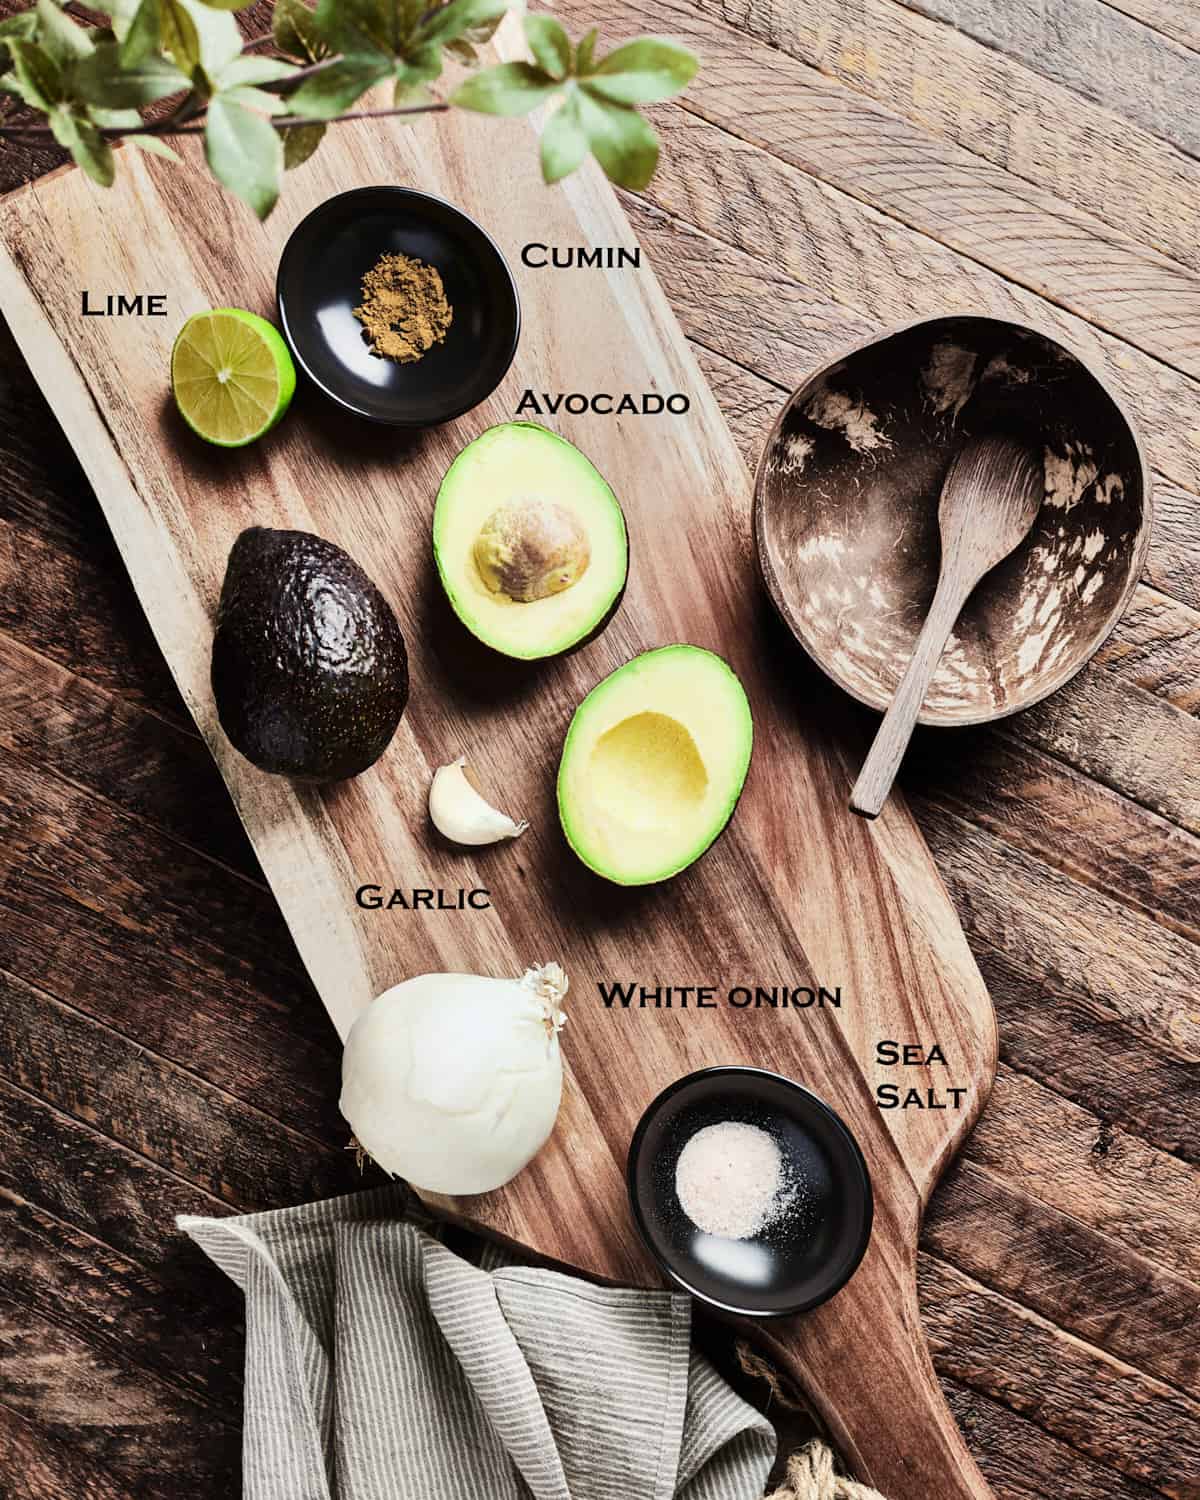 Top down view of guacamole ingredients on wooden table.